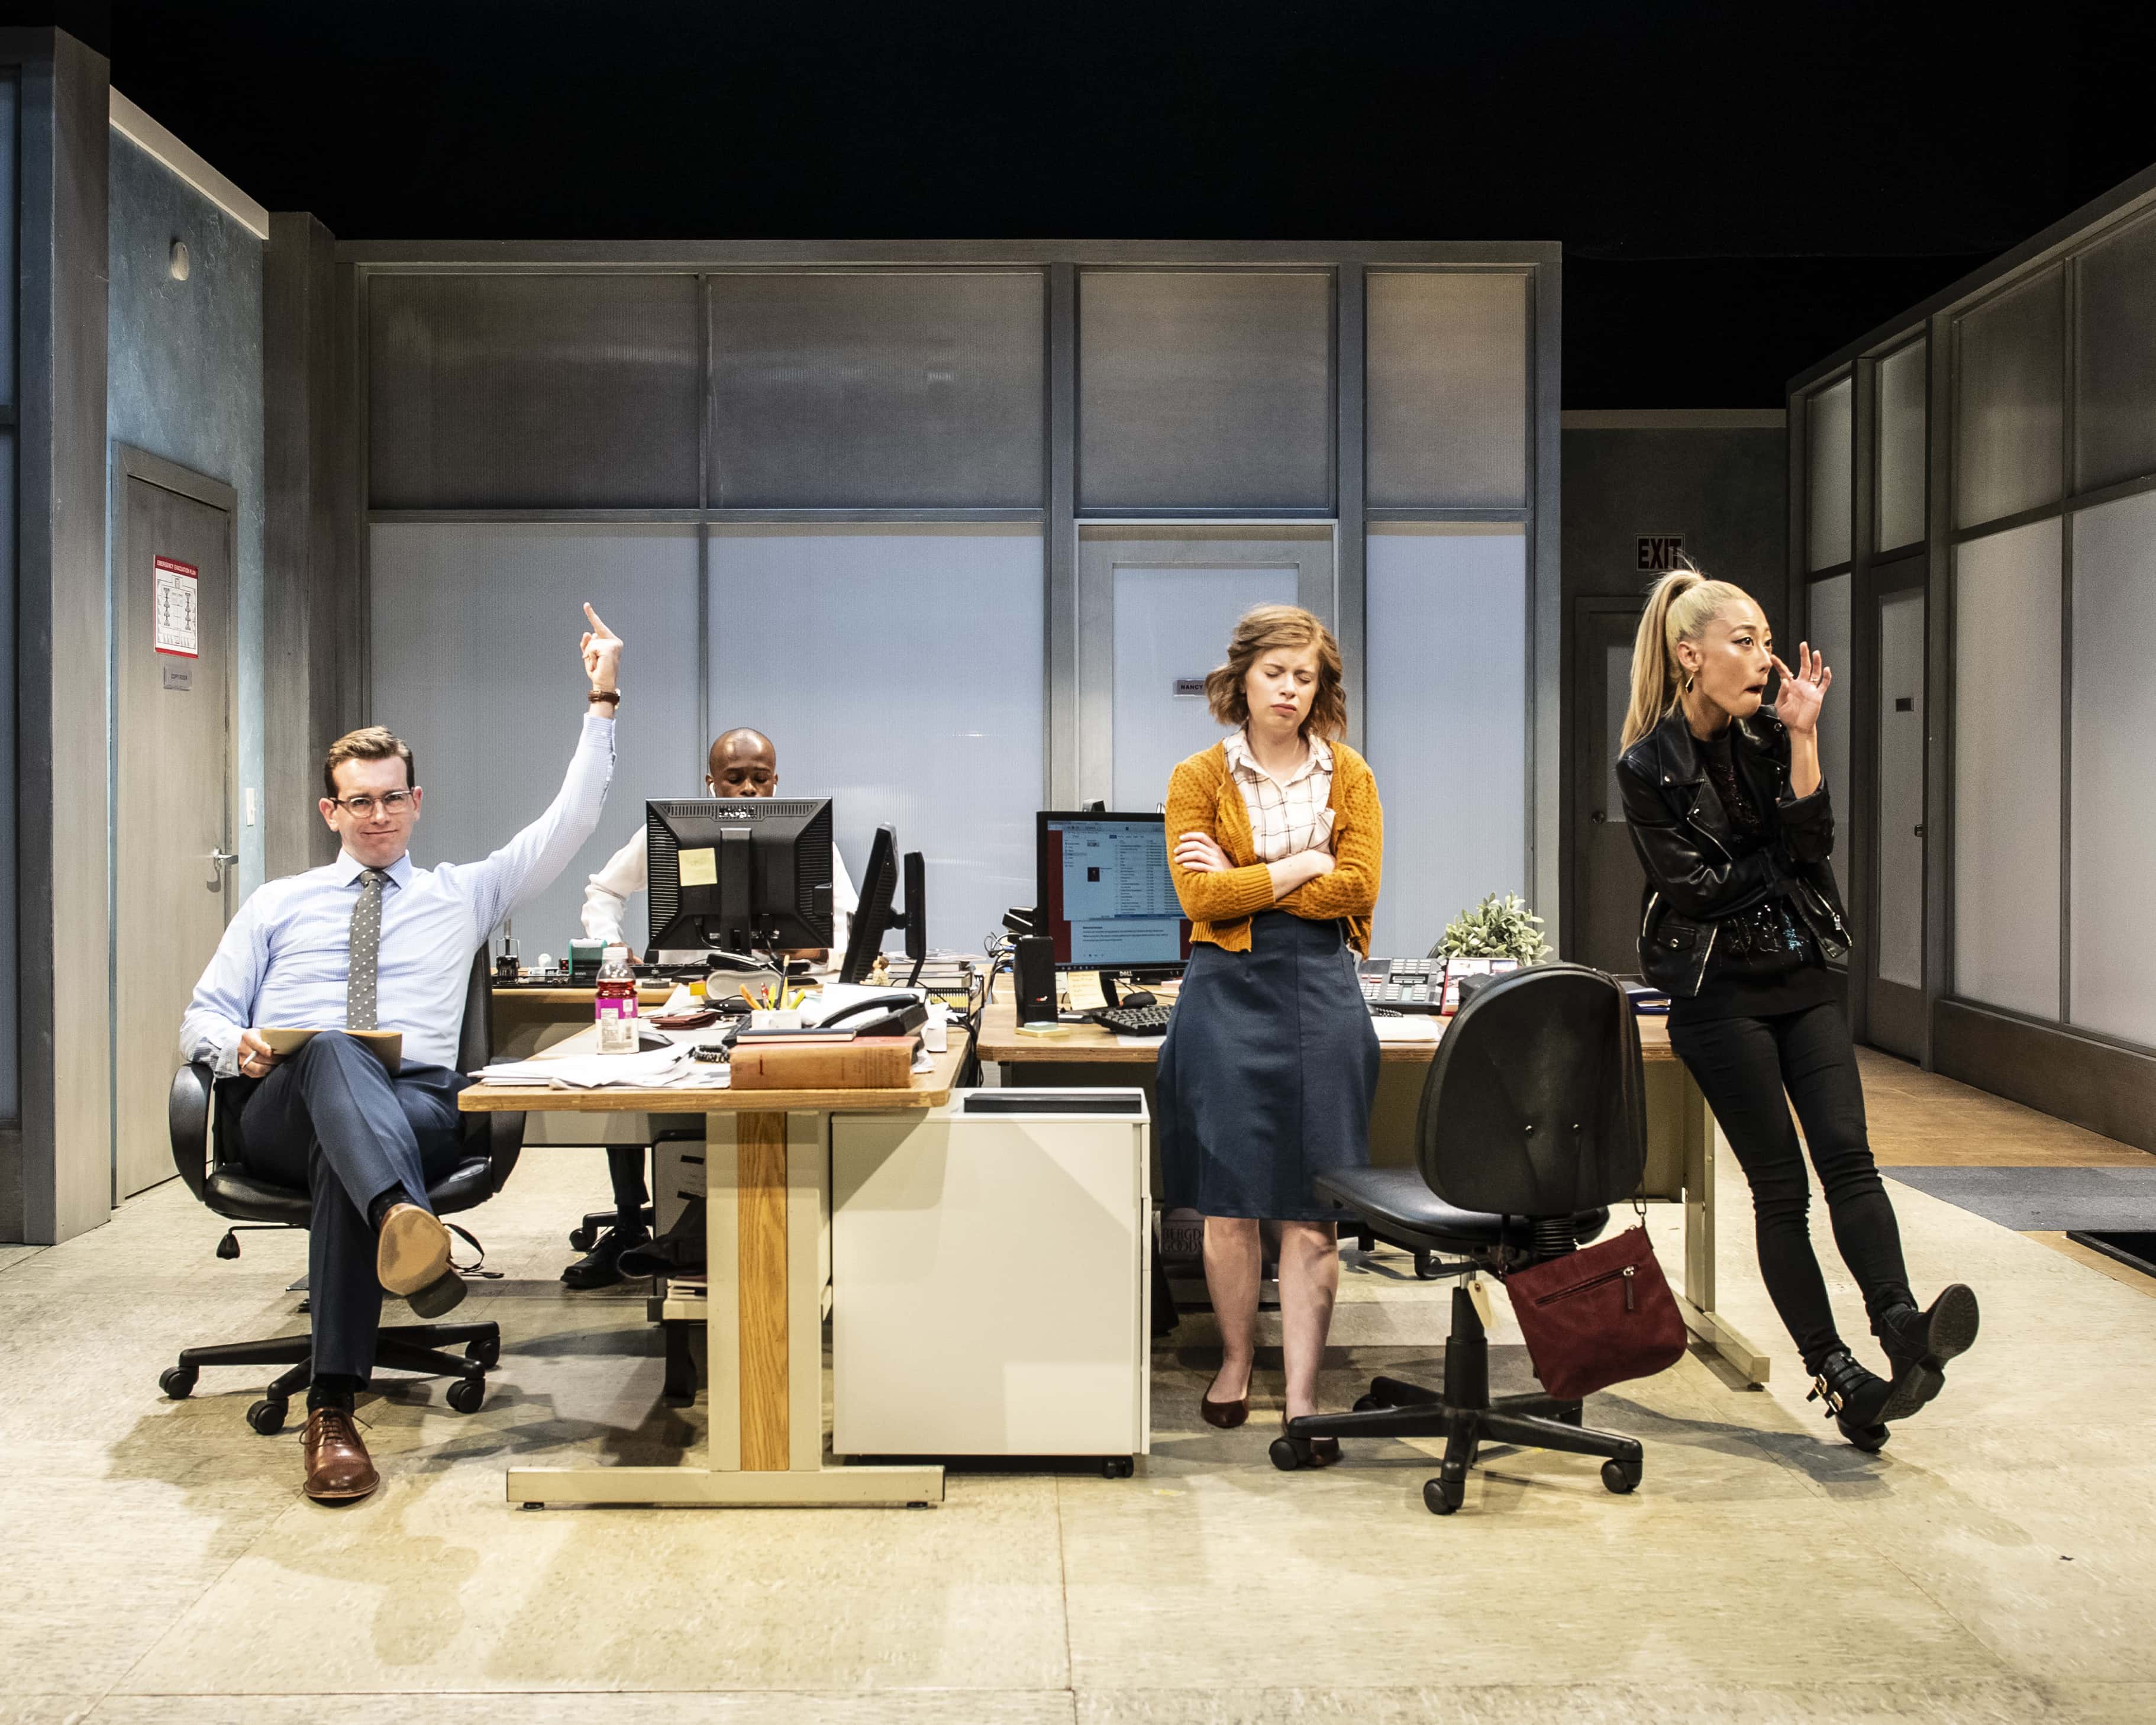 L-R: Conrad Schott, Justin Weaks, Megan Graves, and Eunice Hong in Gloria, now playing at Woolly Mammoth Theatre Company. Photo by Teresa Castracane.